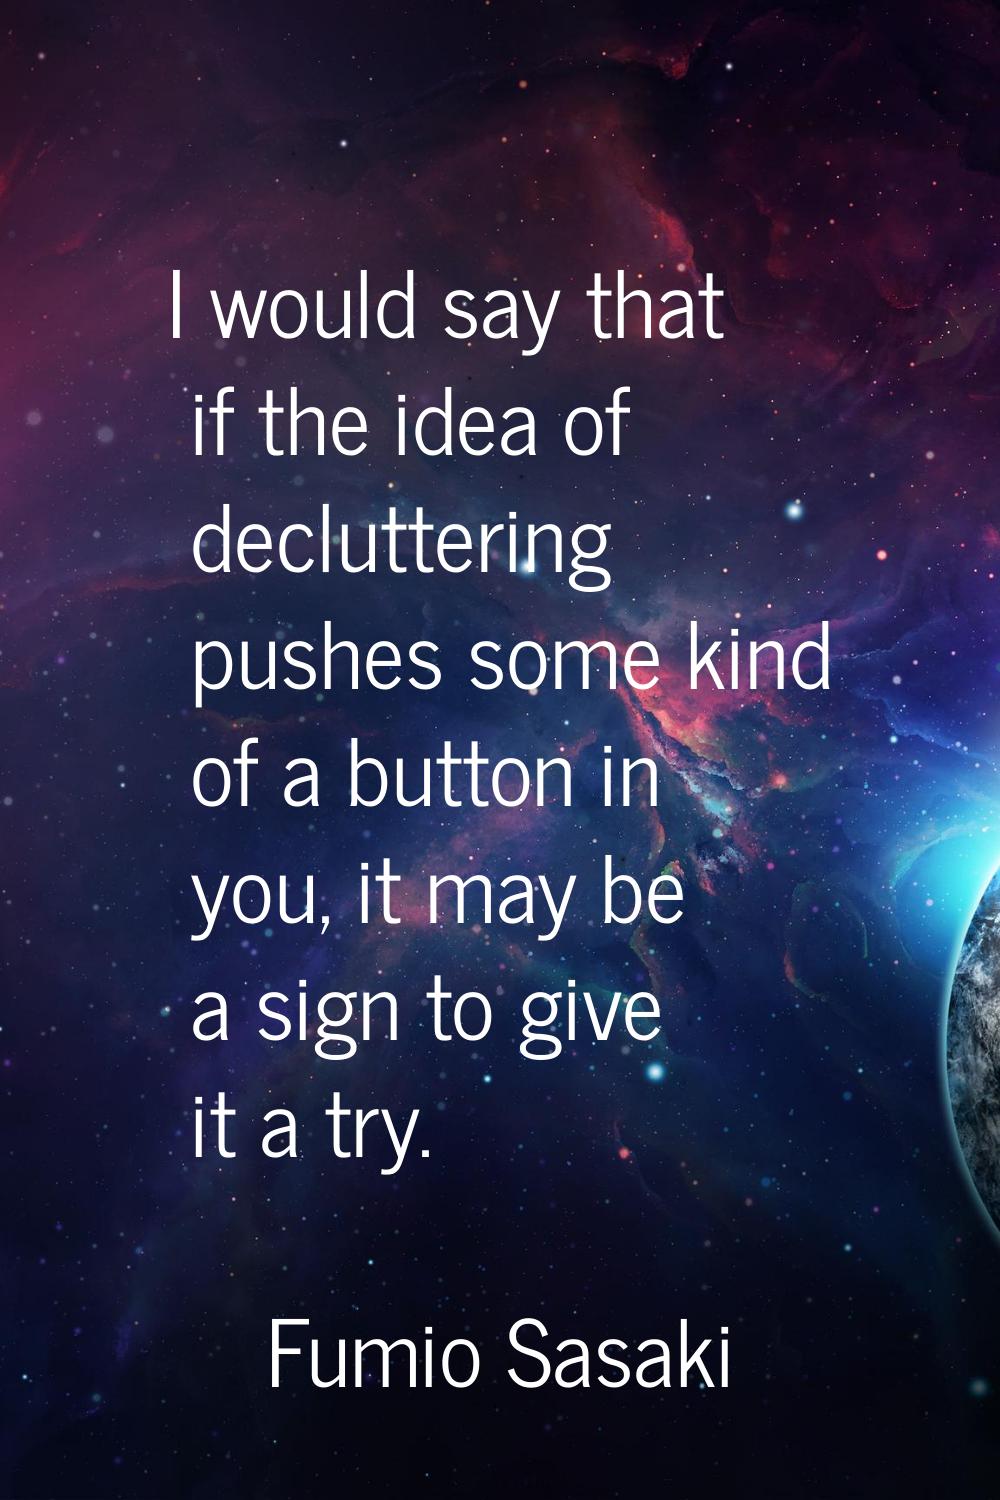 I would say that if the idea of decluttering pushes some kind of a button in you, it may be a sign 